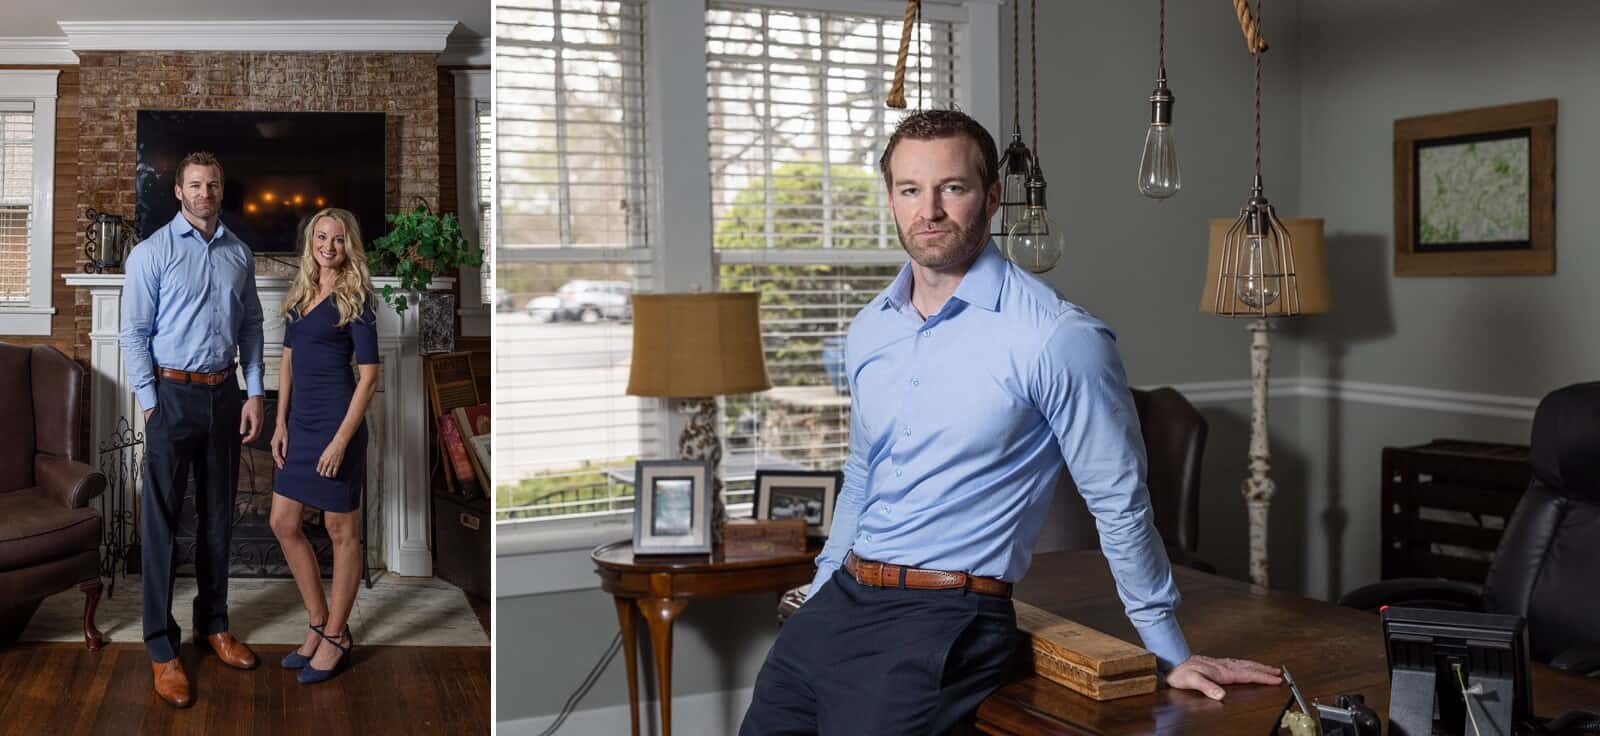 Young man poses for portrait in historic home office